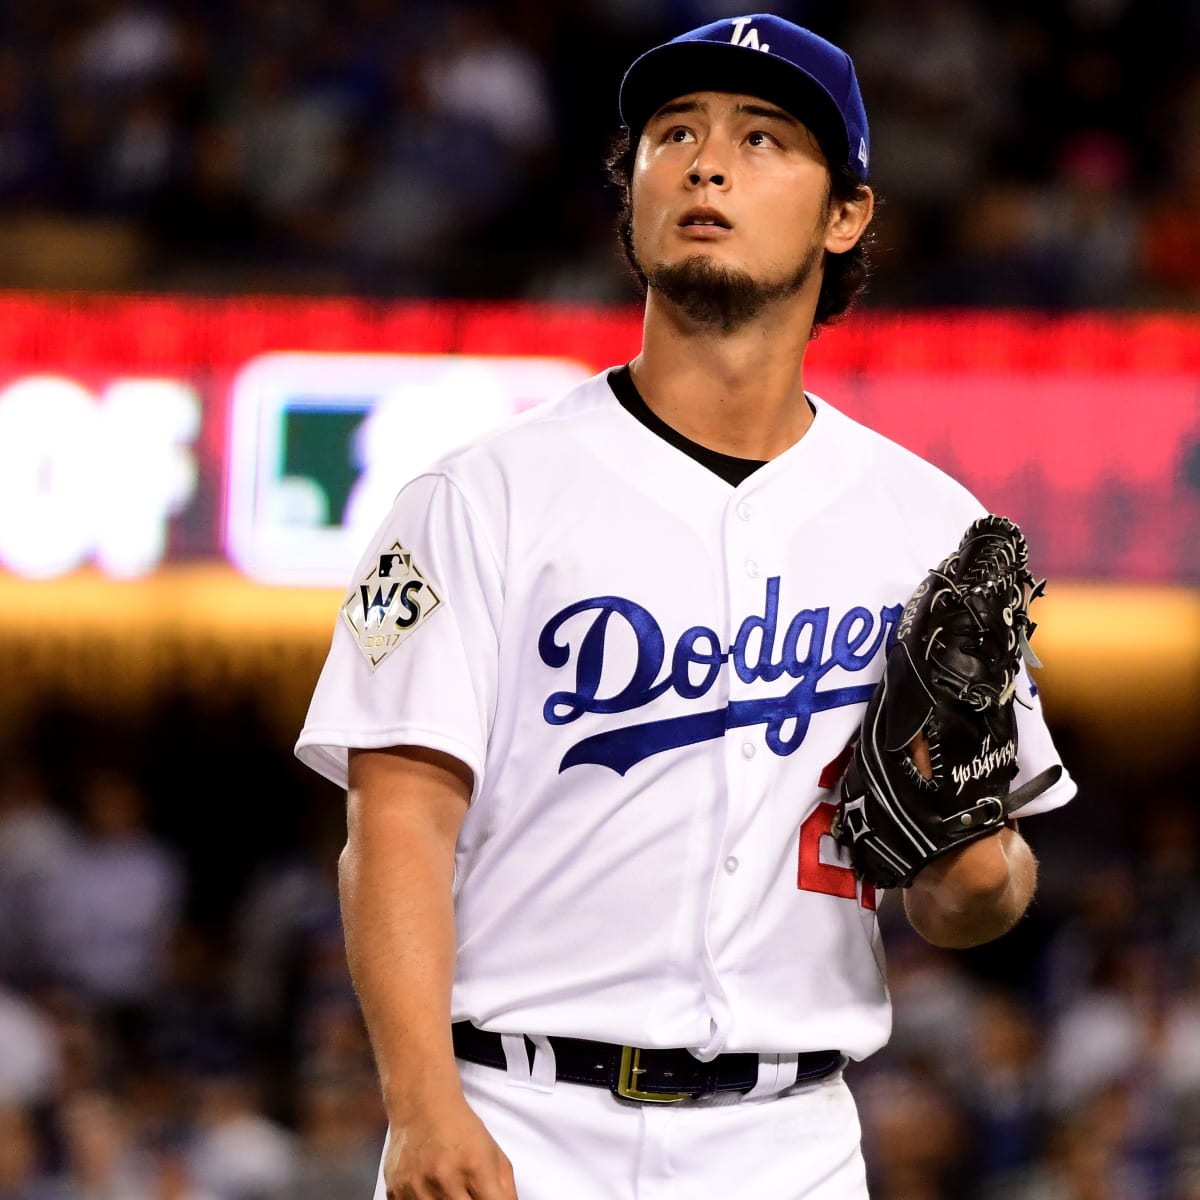 Yu Darvish tipped pitches vs. Astros in World Series - Sports Illustrated